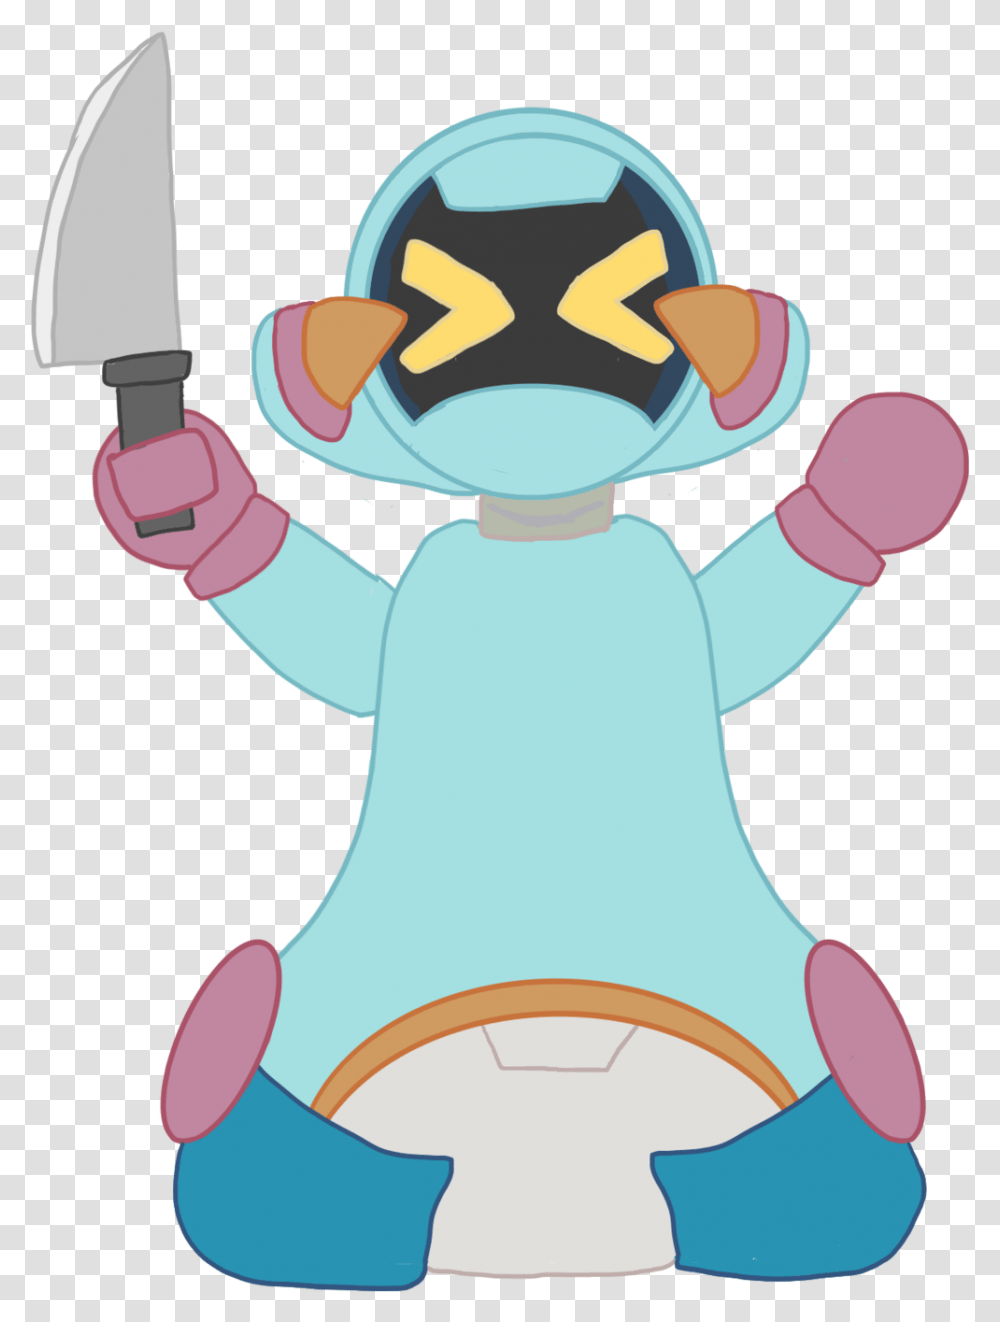 Master Has Given Roboppy A Knife Cartoon, Animal, Blade, Weapon, Weaponry Transparent Png